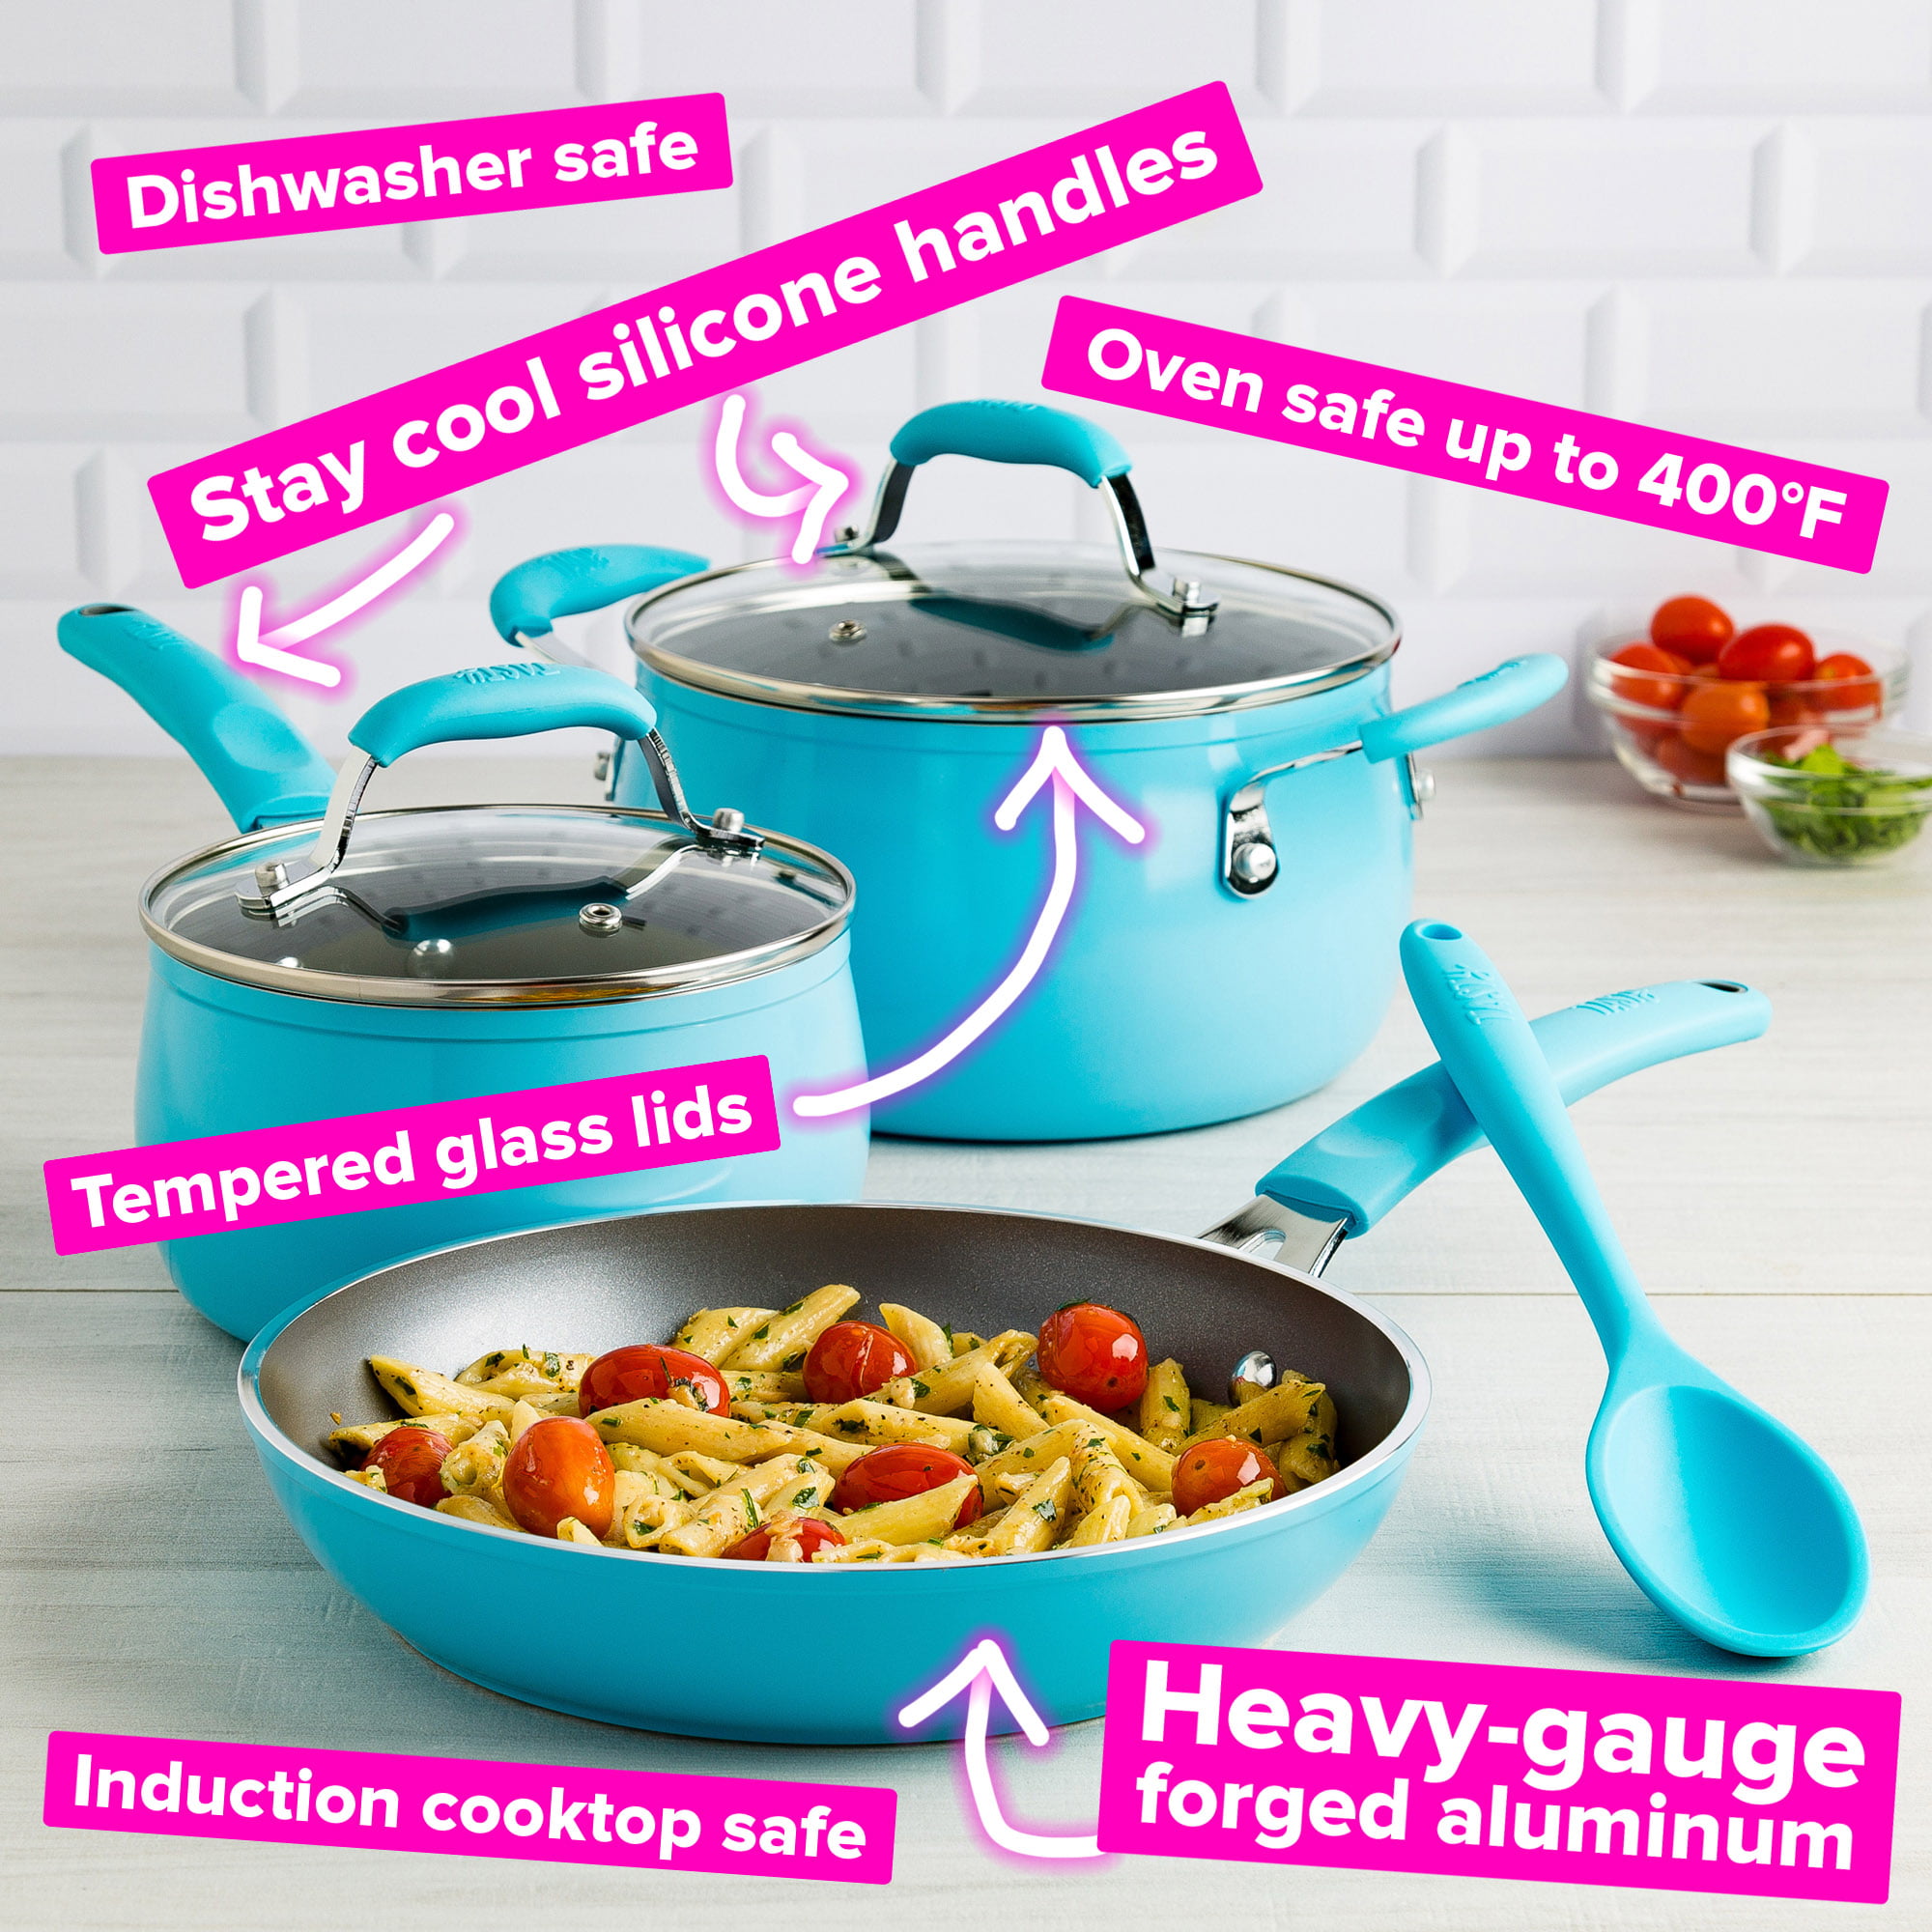 Tastiwave 6 Piece Microwave Cookware Set by Chef Tony (AS SEEN ON